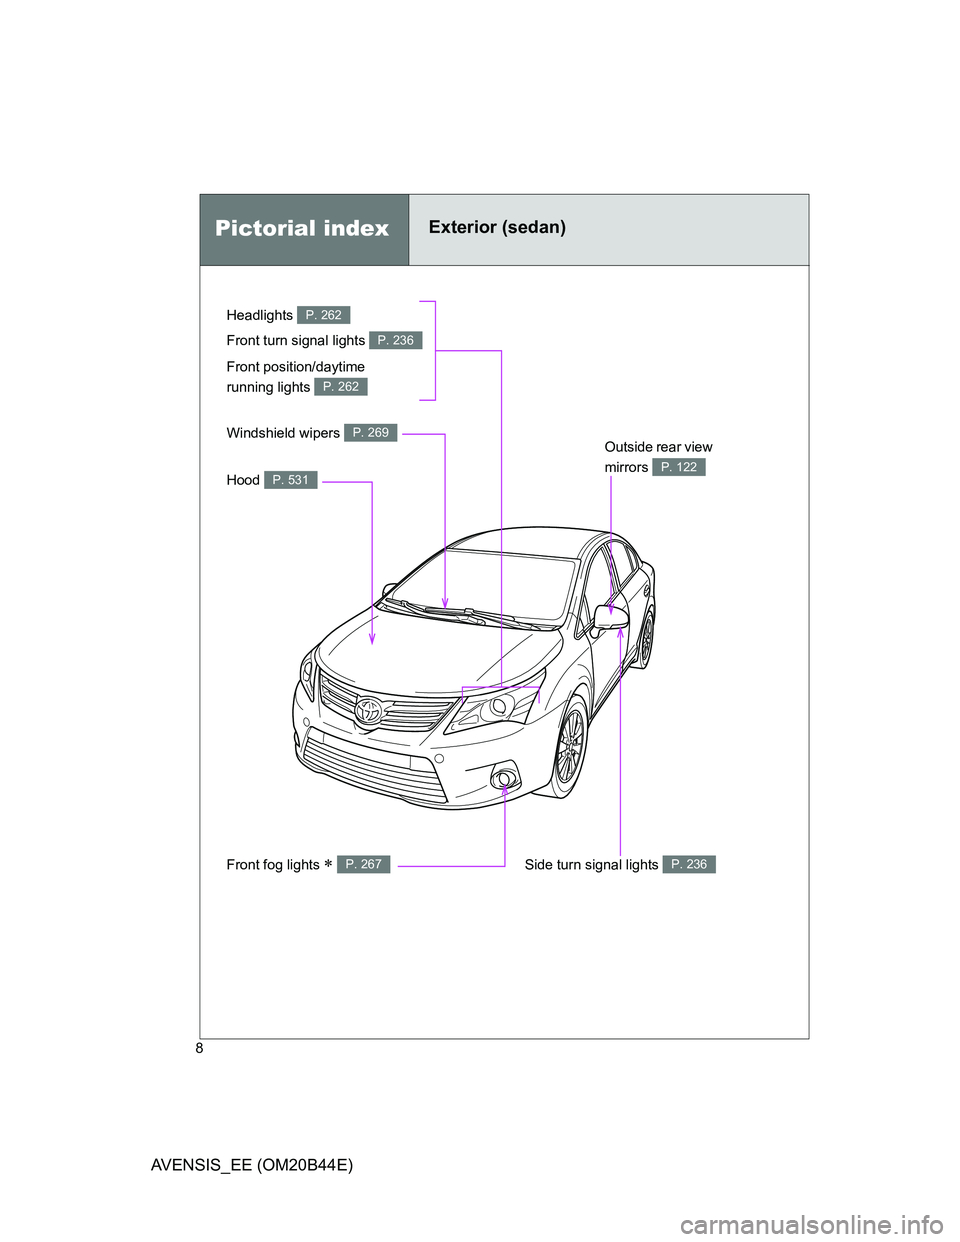 TOYOTA AVENSIS 2013  Owners Manual (in English) 8
AVENSIS_EE (OM20B44E)
Headlights P. 262
Pictorial indexExterior (sedan)
Front fog lights  P. 267
Front turn signal lights P. 236
Hood P. 531
Windshield wipers P. 269Outside rear view 
mirrors 
P.